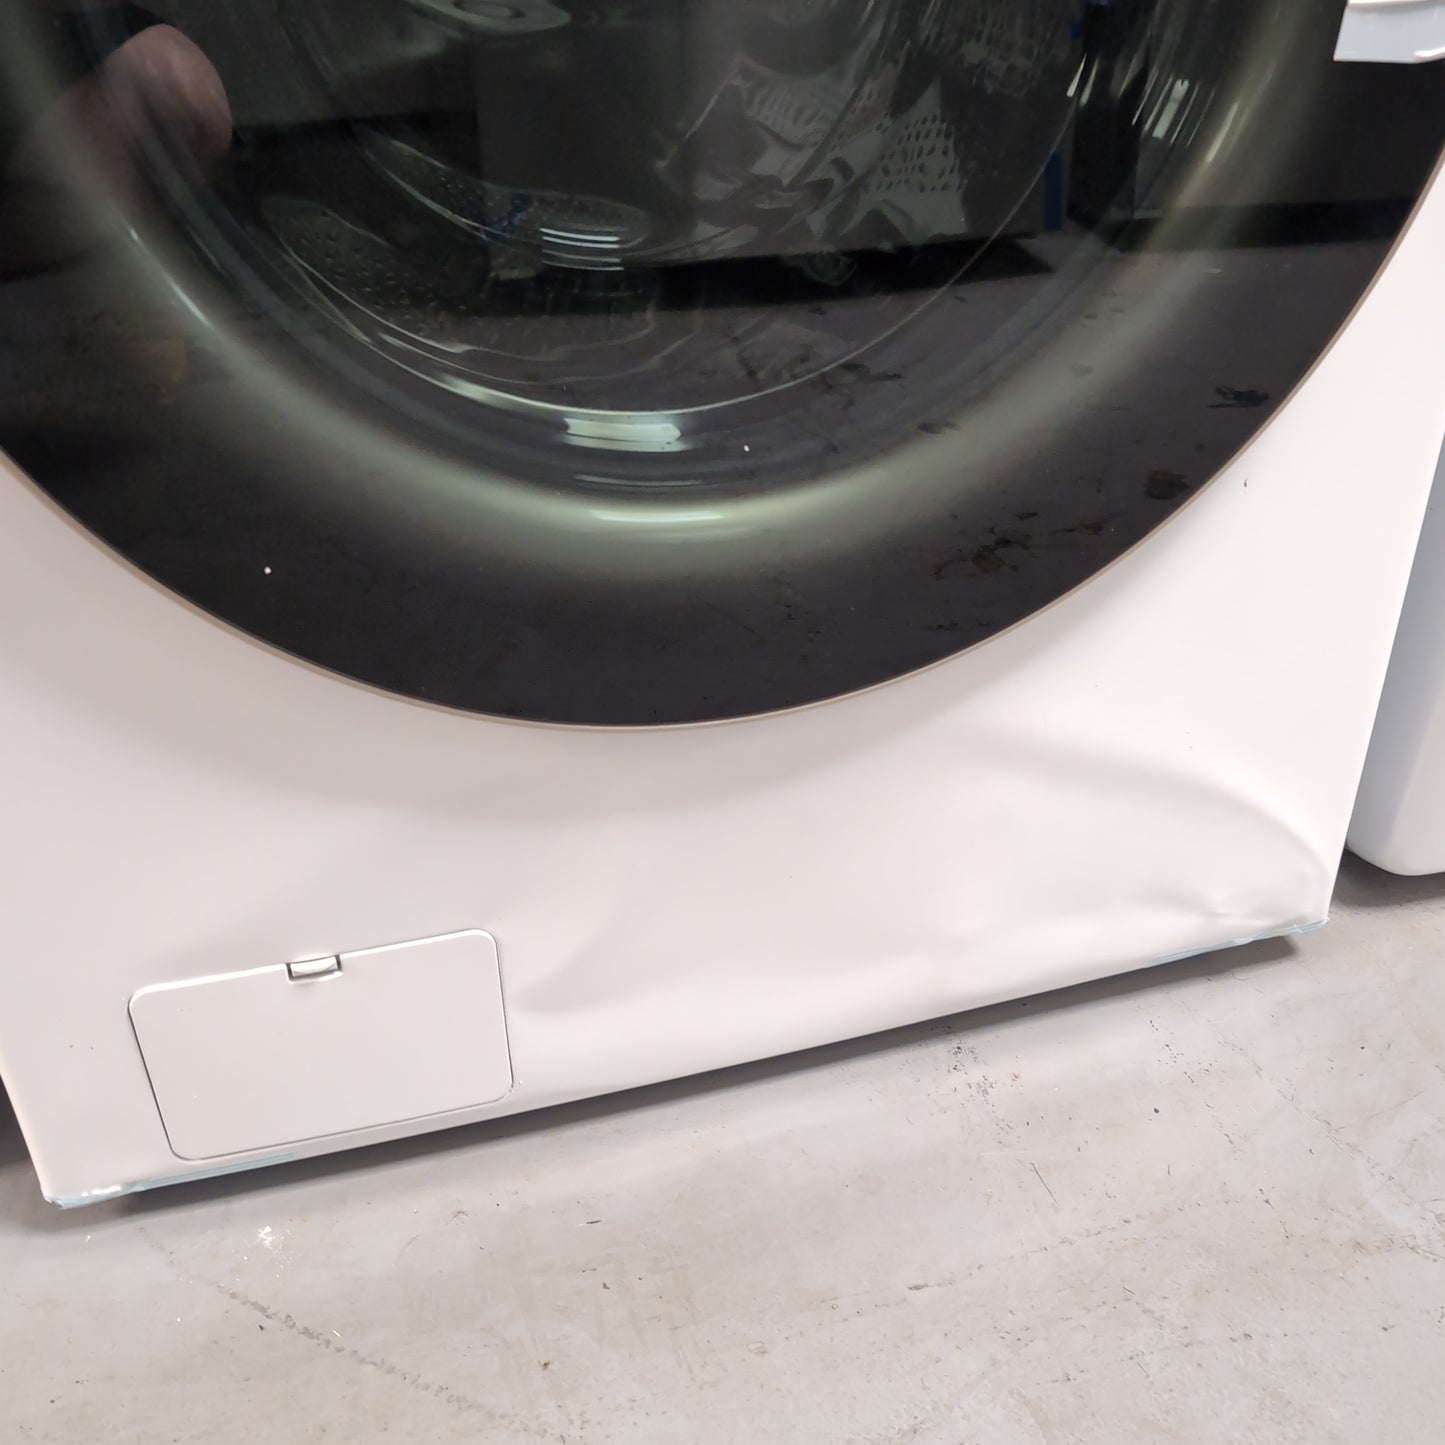 New LG
WashTower Stacked SMART Laundry Center 4.5 Cu.Ft. Front Load Washer & 7.4 Cu.Ft. Electric Dryer in White w/ Steam. Cosmetic Damage